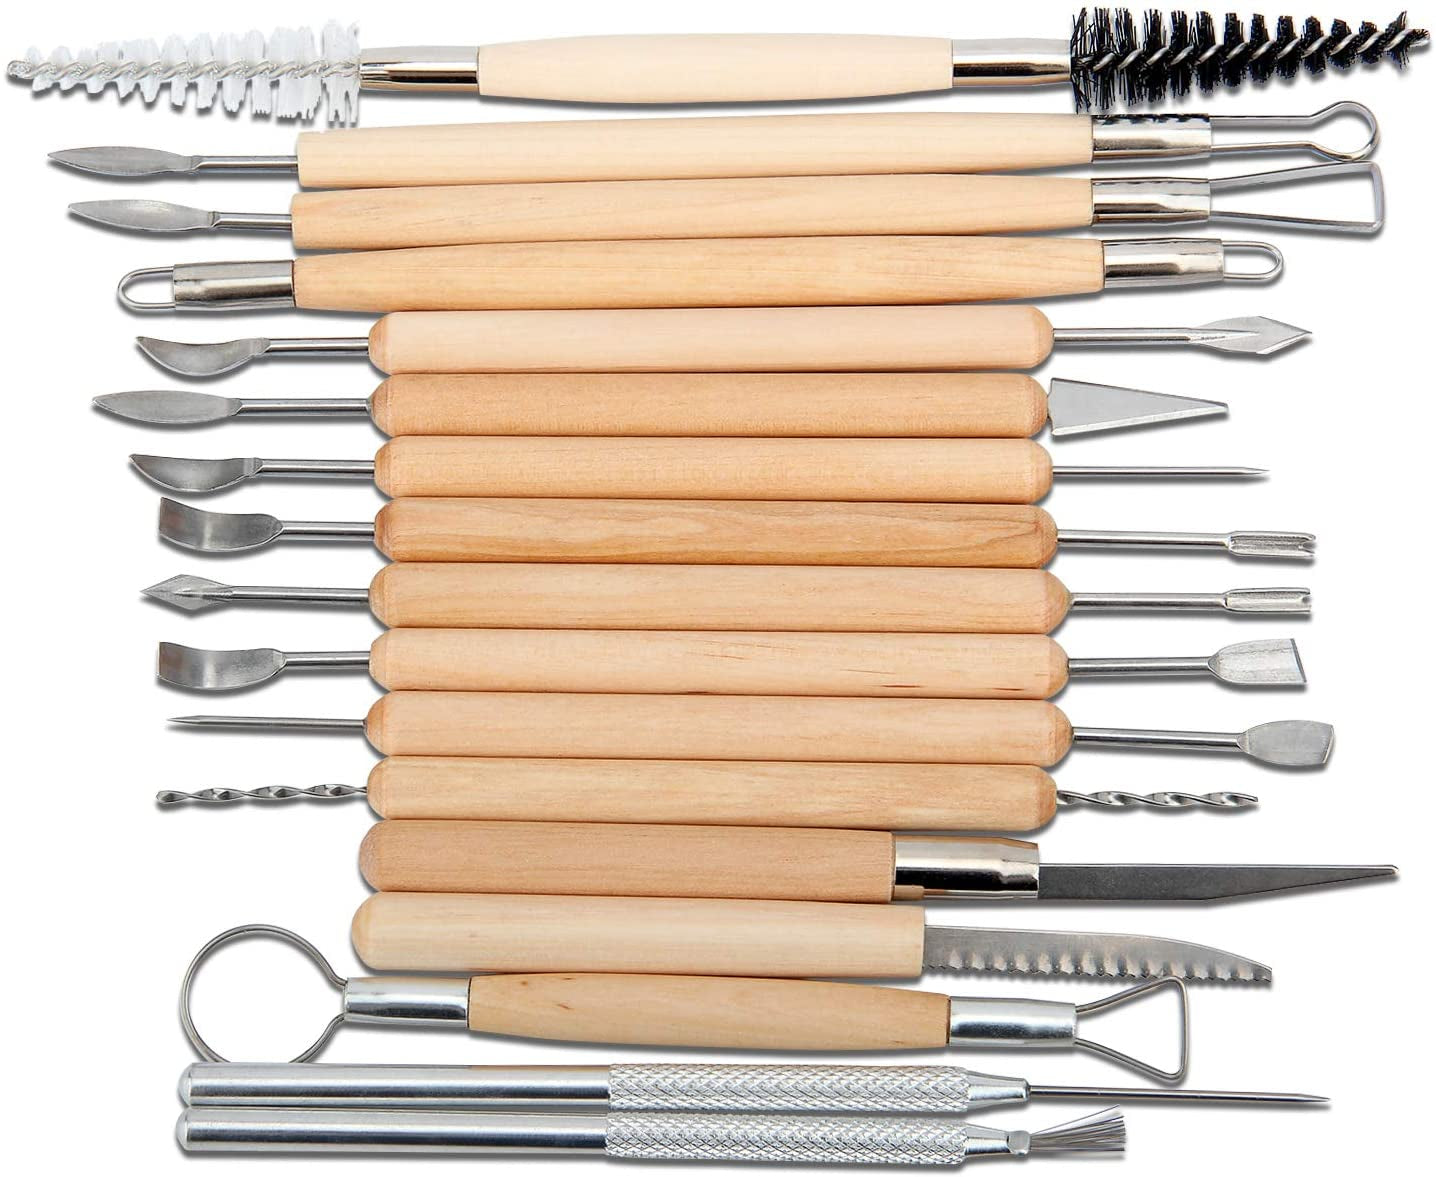 42-Piece Clay Sculpting Tool Kit - Wooden Handle Pottery Carving Tool Set